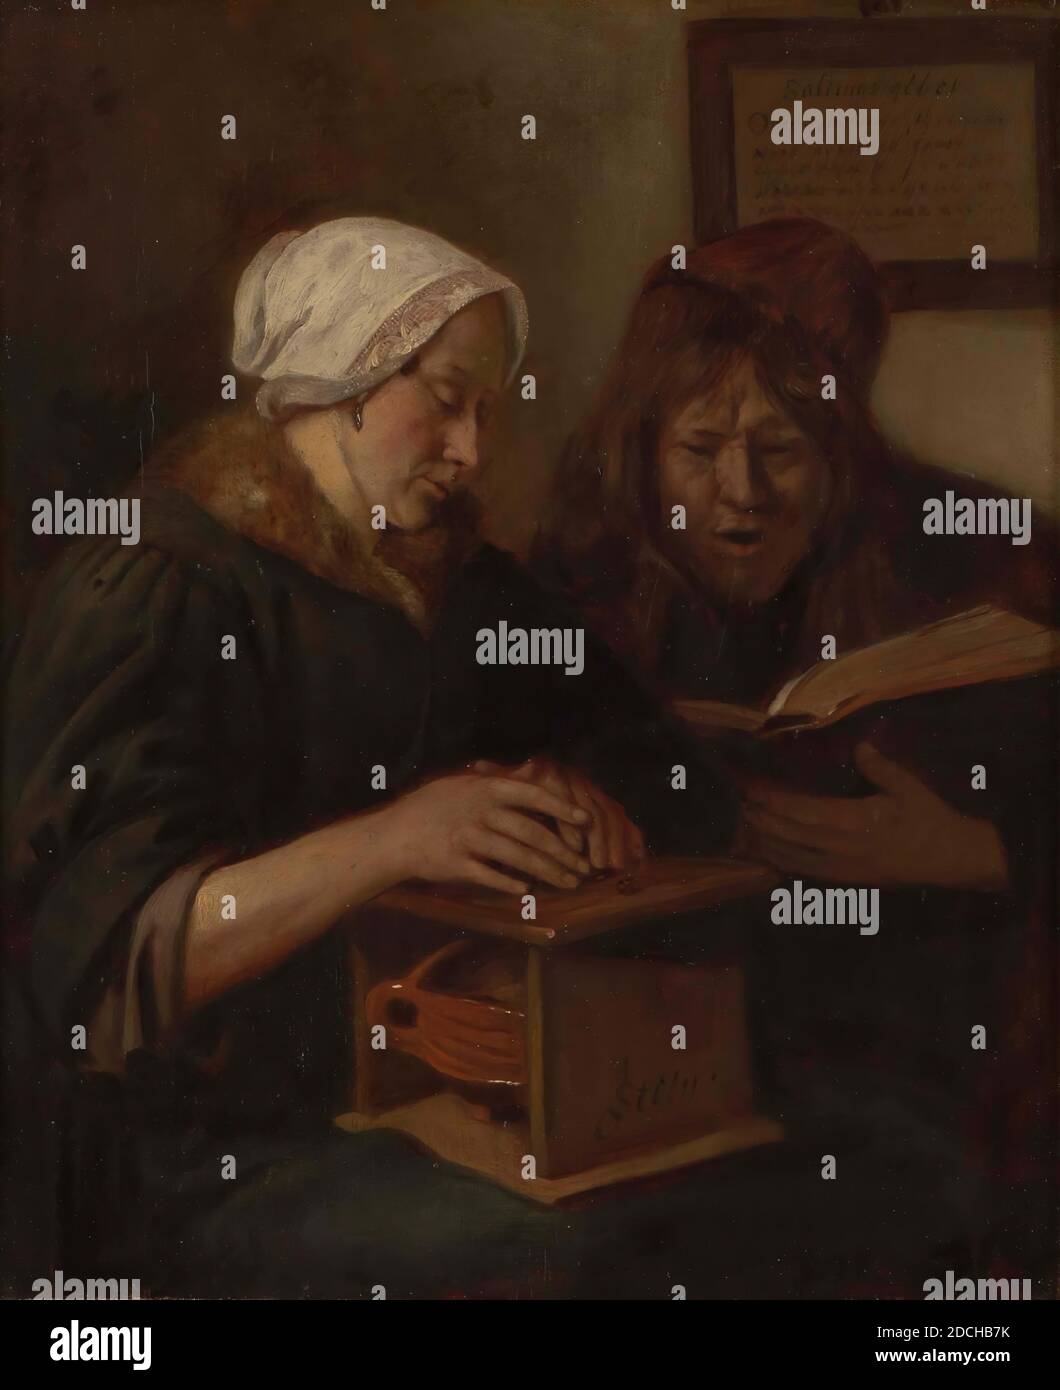 Couple, warming and reading the Bible, Couple reading the Bible, painting, Jan Steen, c. 1650, Signature front, bottom center, on stove: J. Steen J and S in one, panel, oil paint, painted, Carrier: 30 × 24 × 2cm 300 × 240 × 20mm, With frame: 45.5 × 40.3 × 4.5cm 455 × 403 × 45mm, bible, woman, reading, genre, man, Painting depicting a man and a woman resembling the painter and his wife. The man, pictured on the right, reads from the Bible. He is depicted right in front and supports the Bible with his left hand. The woman, pictured on the left, warms her hands on an oven she has on her lap. She Stock Photo